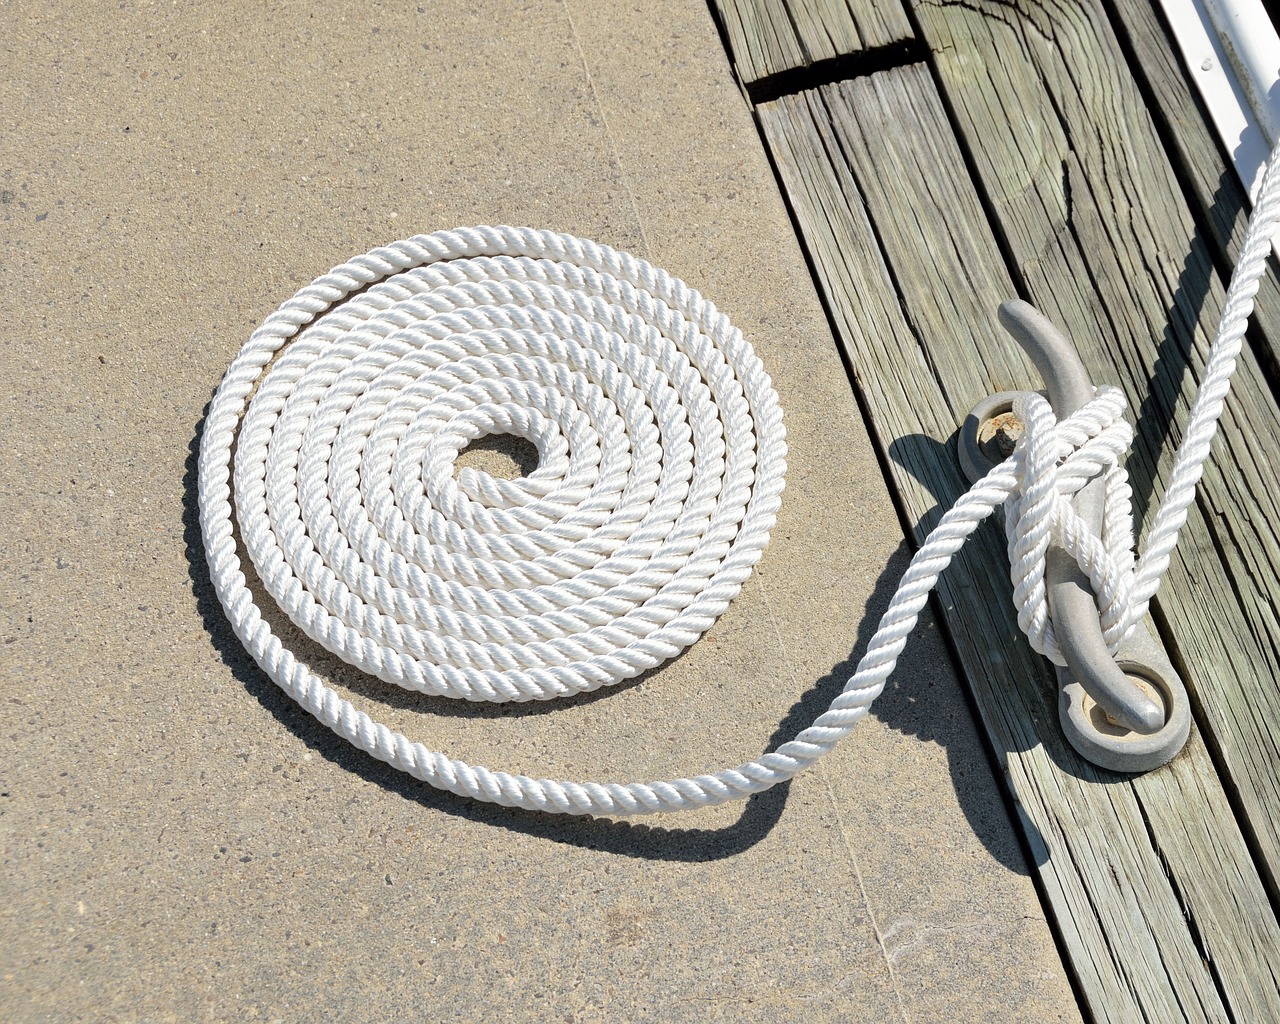 Boat tie up,mooring,rope,cleat,tied - free image from needpix.com